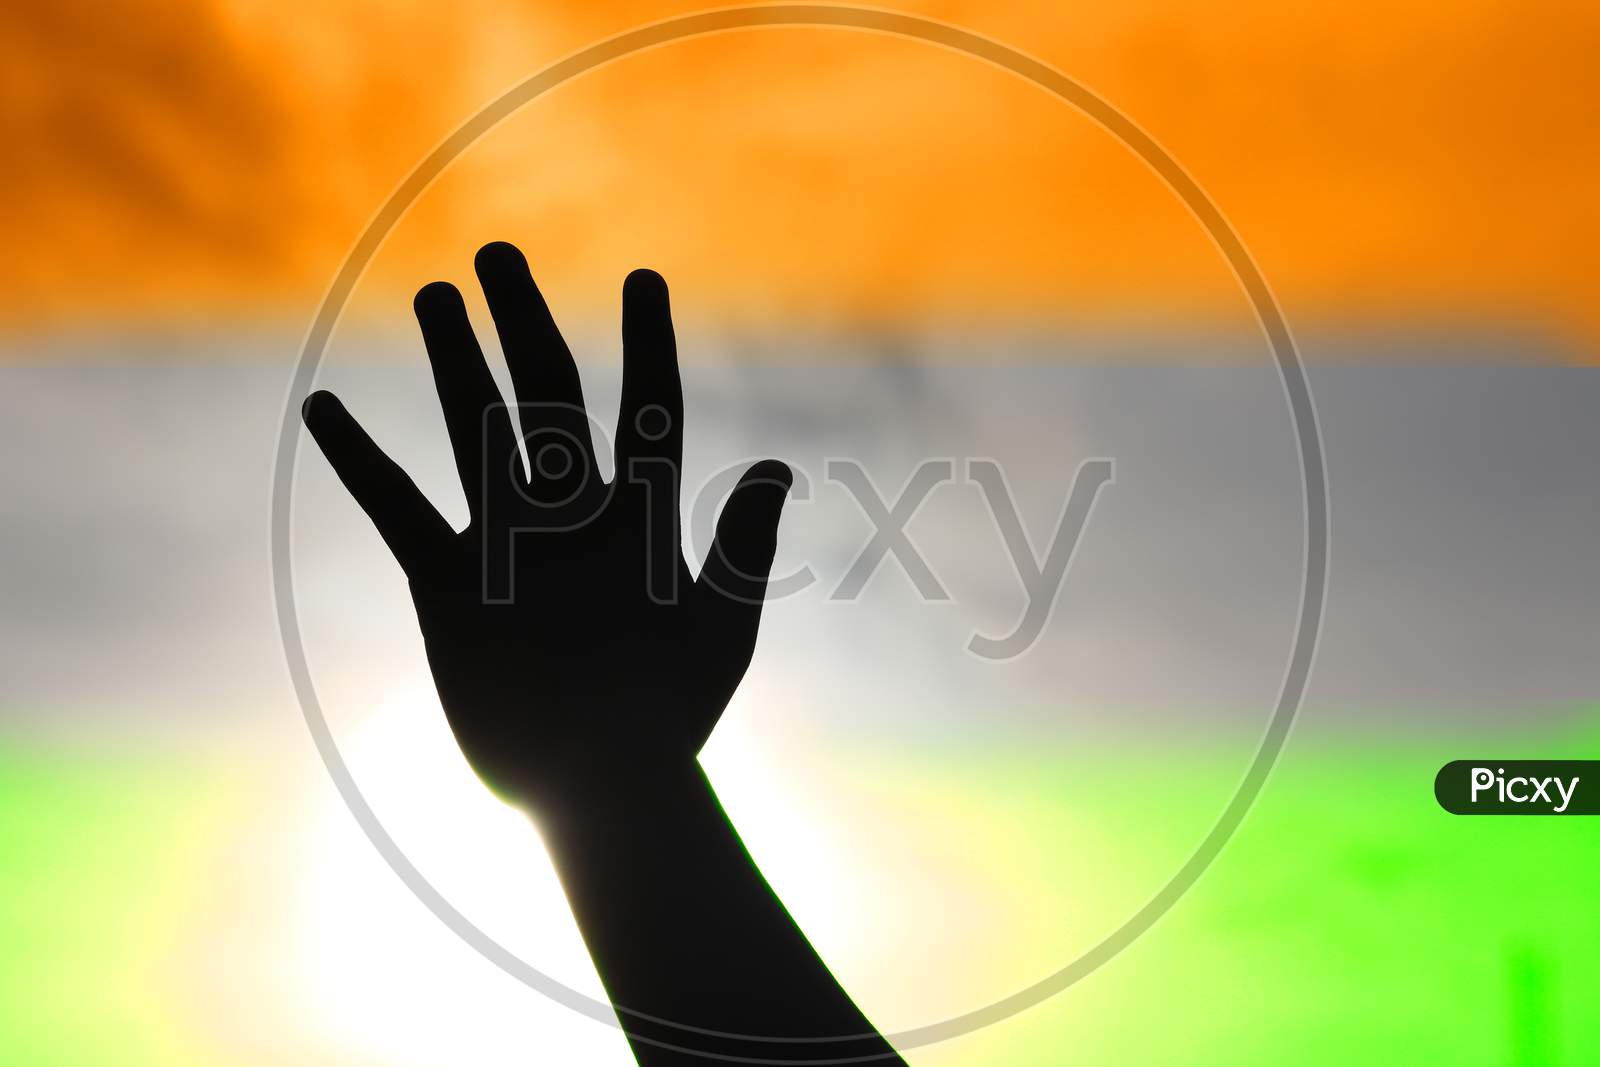 Hand reaching out to the sky celebrating the Independence of India